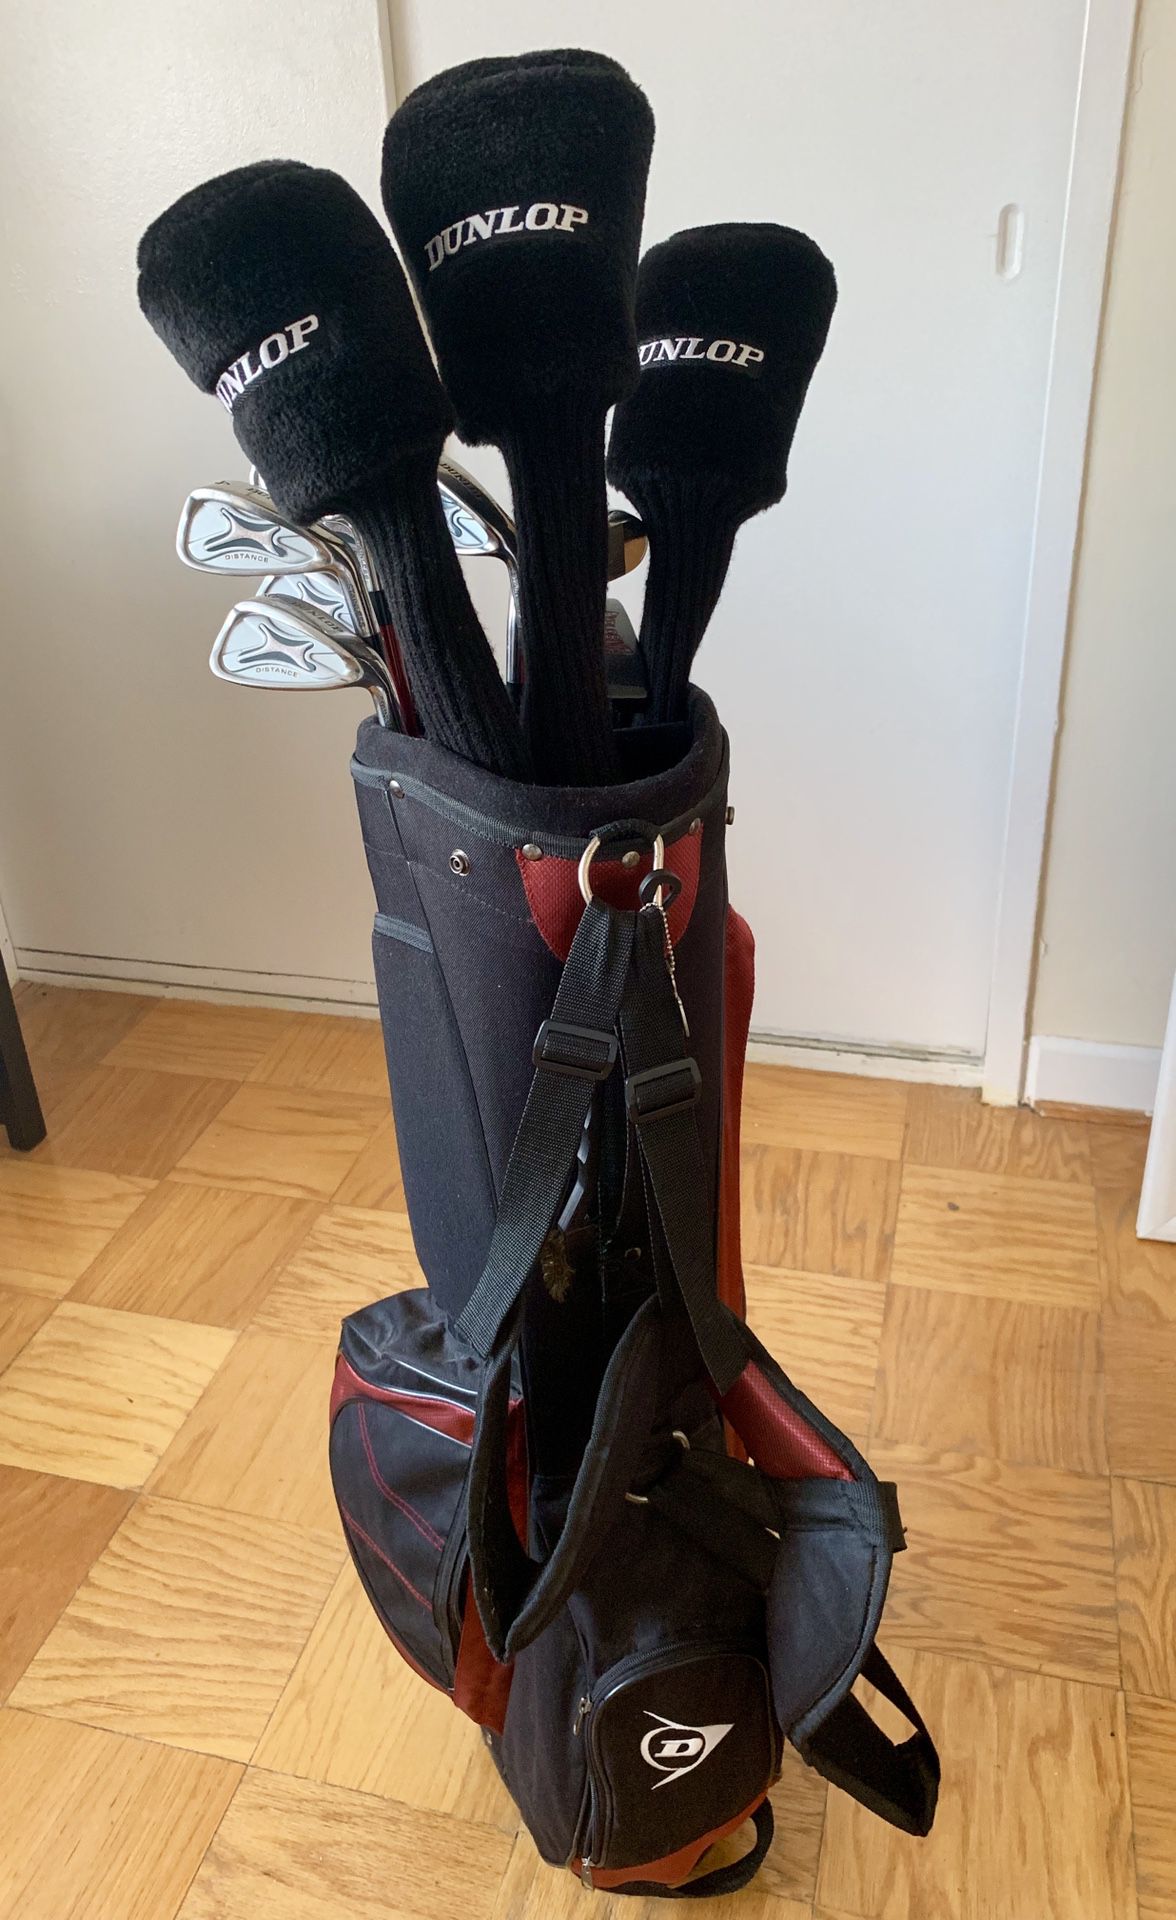 Dunlop Full Golf Club Set (Carrier and Balls Included)